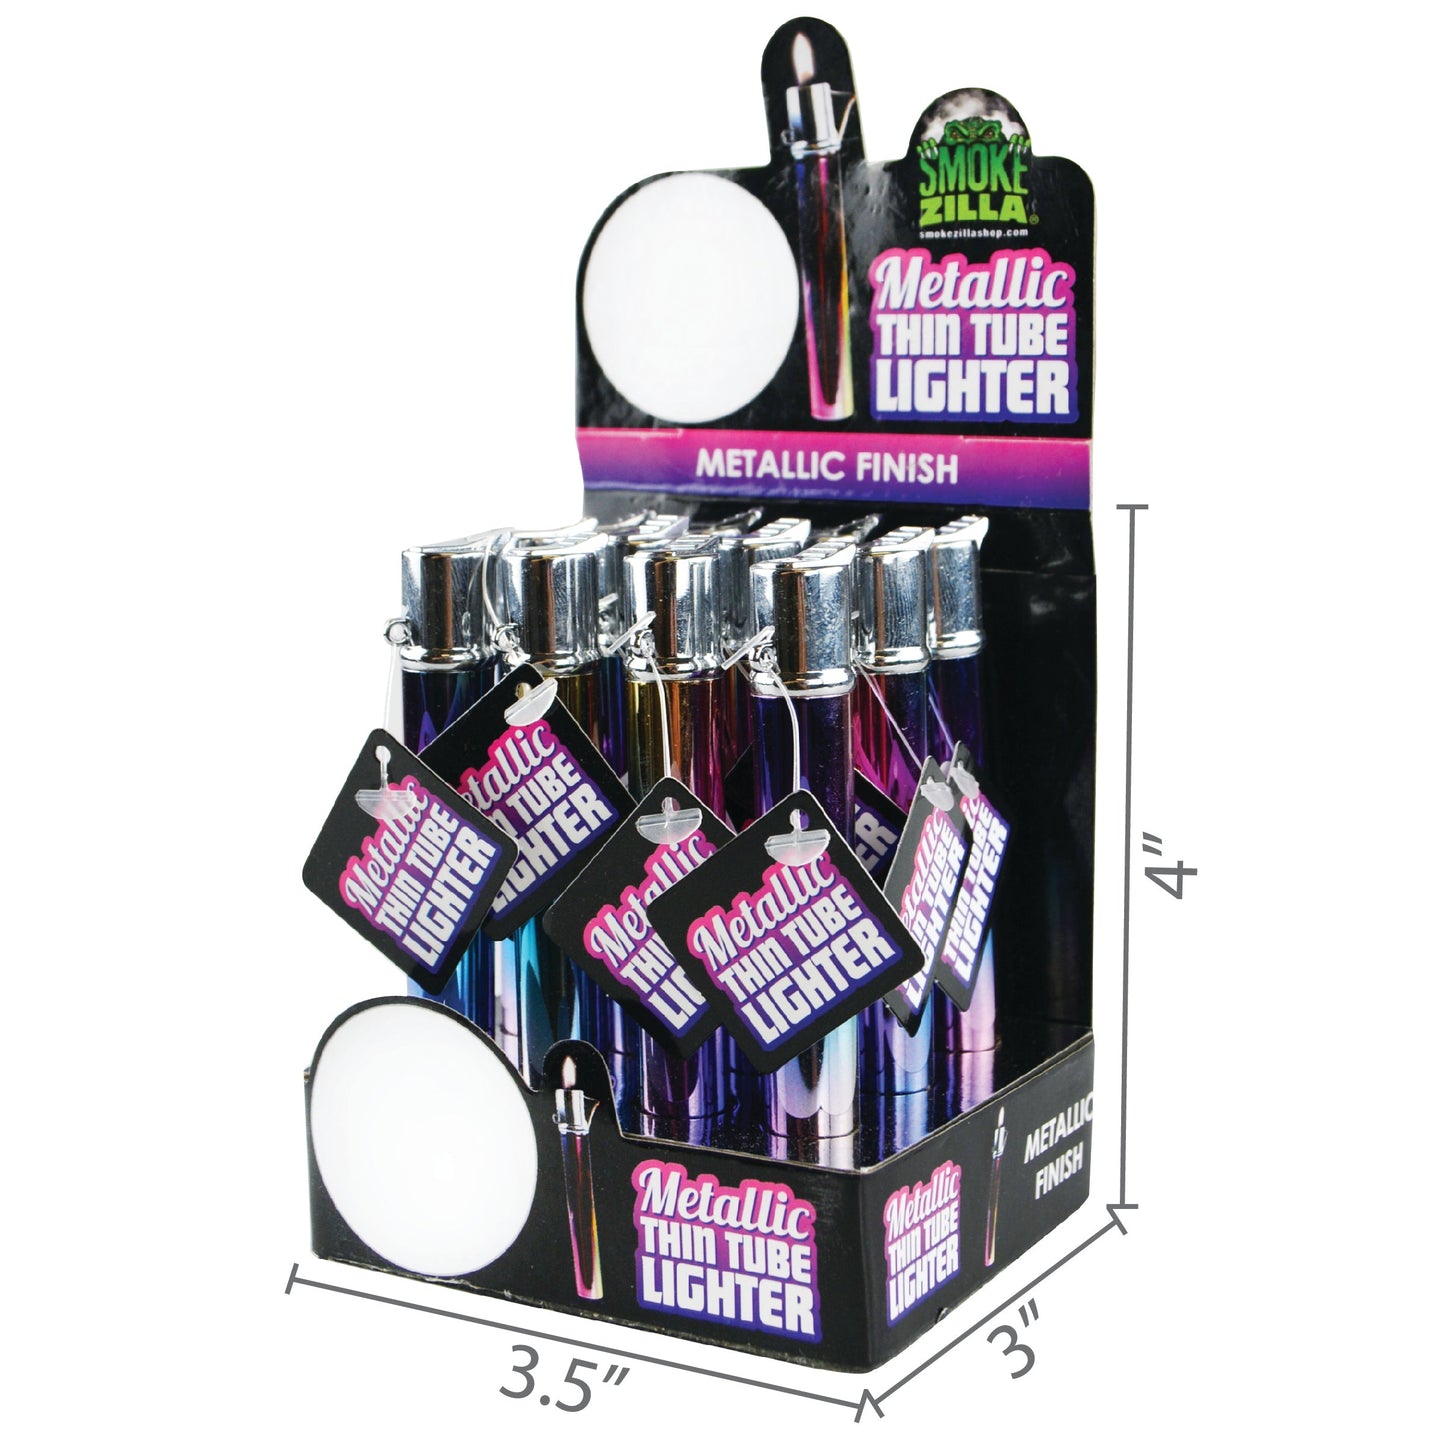 ITEM NUMBER 026642 THIN TUBE LIGHTER 12 PIECES PER DISPLAY